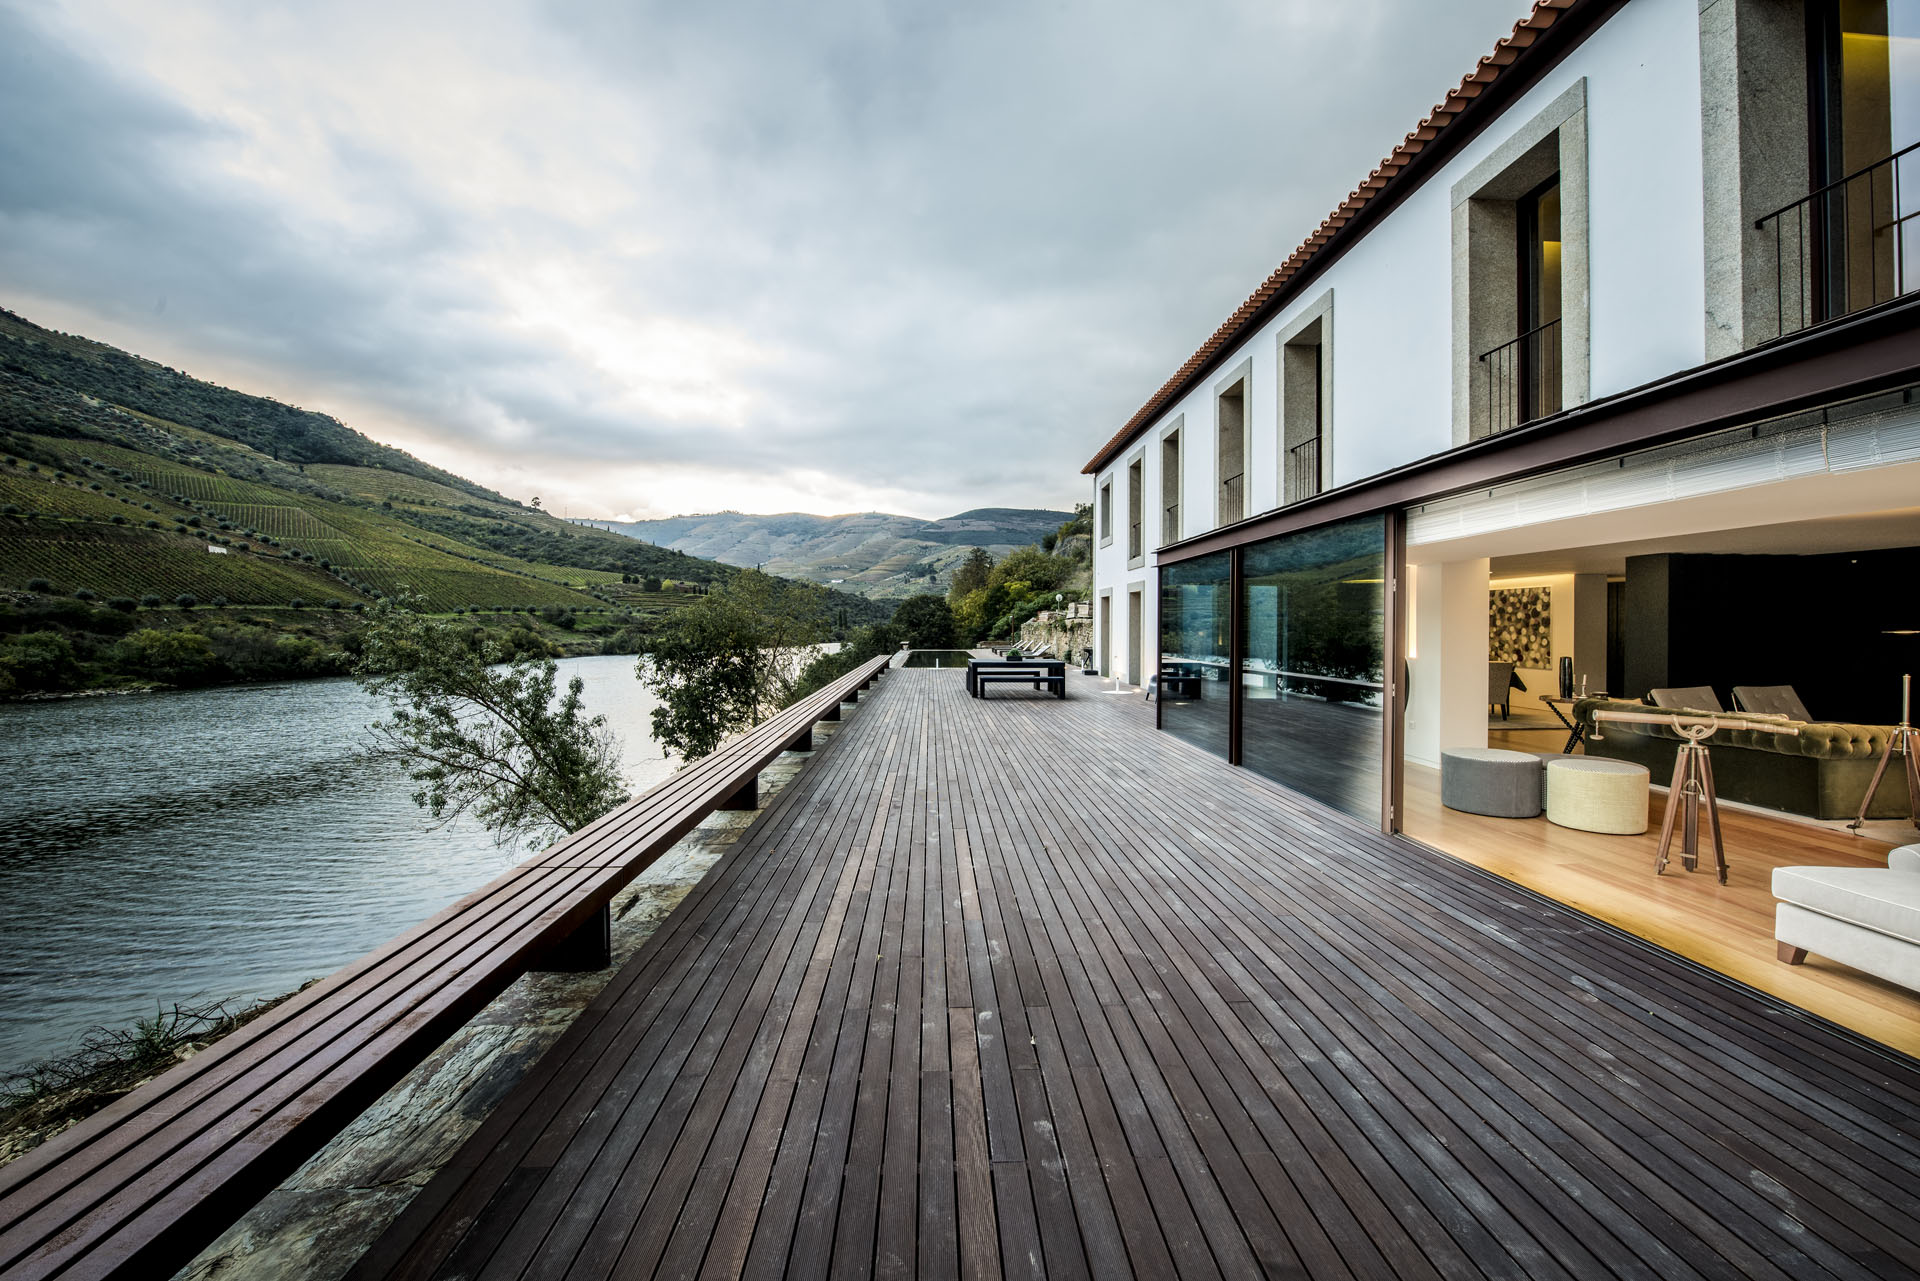 Property Image 2 - Luxury villa located on the banks of the River Douro!